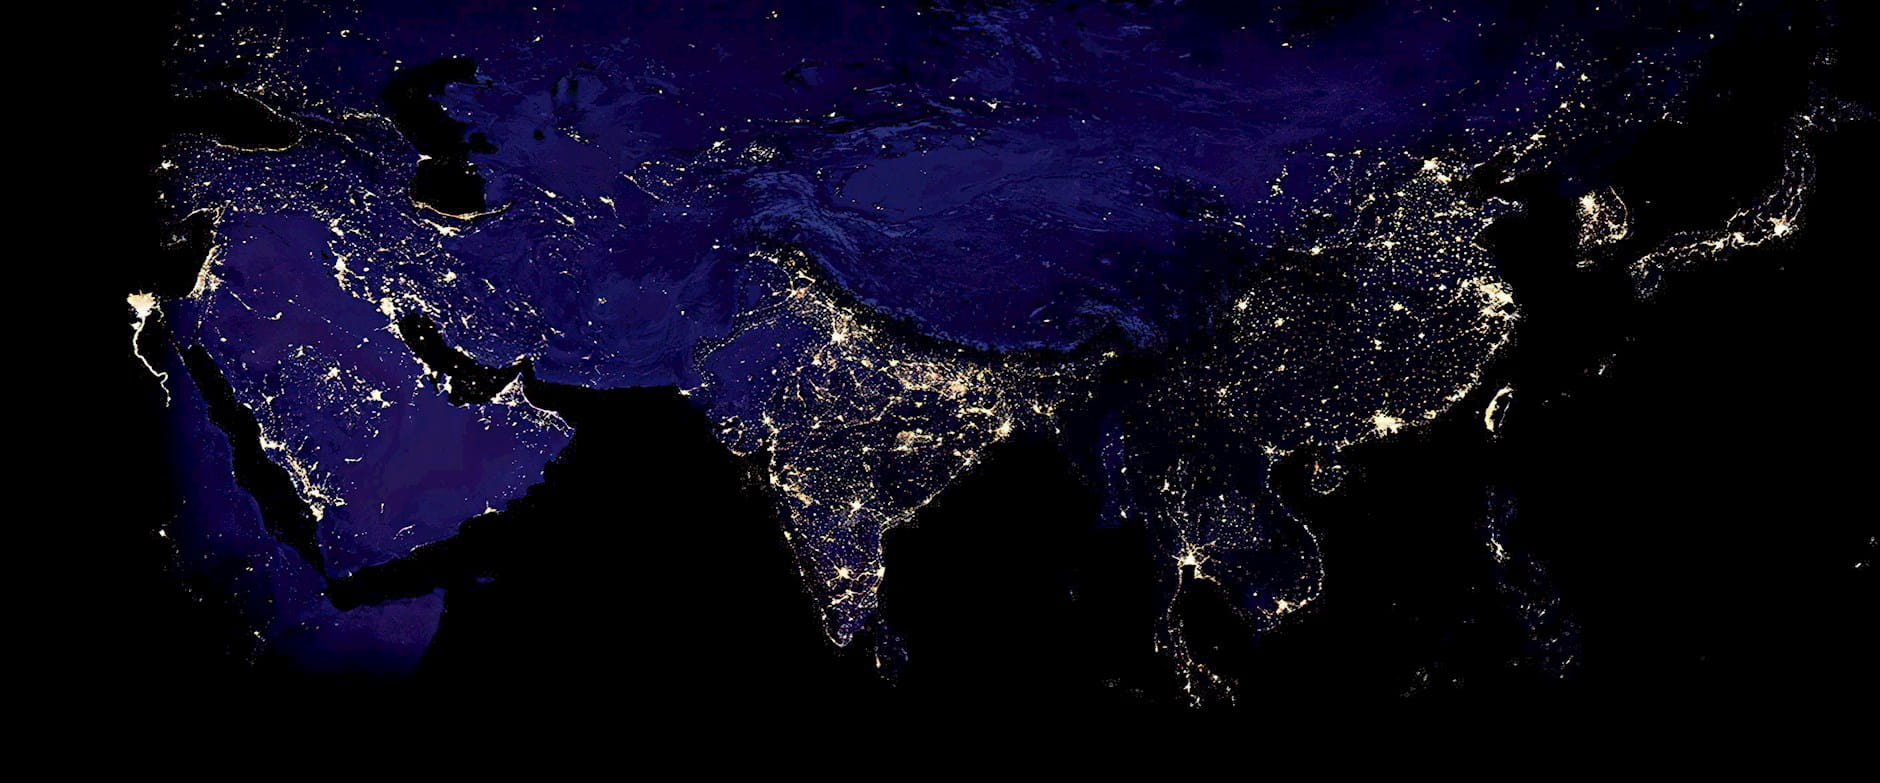 Earth from satellite view at night